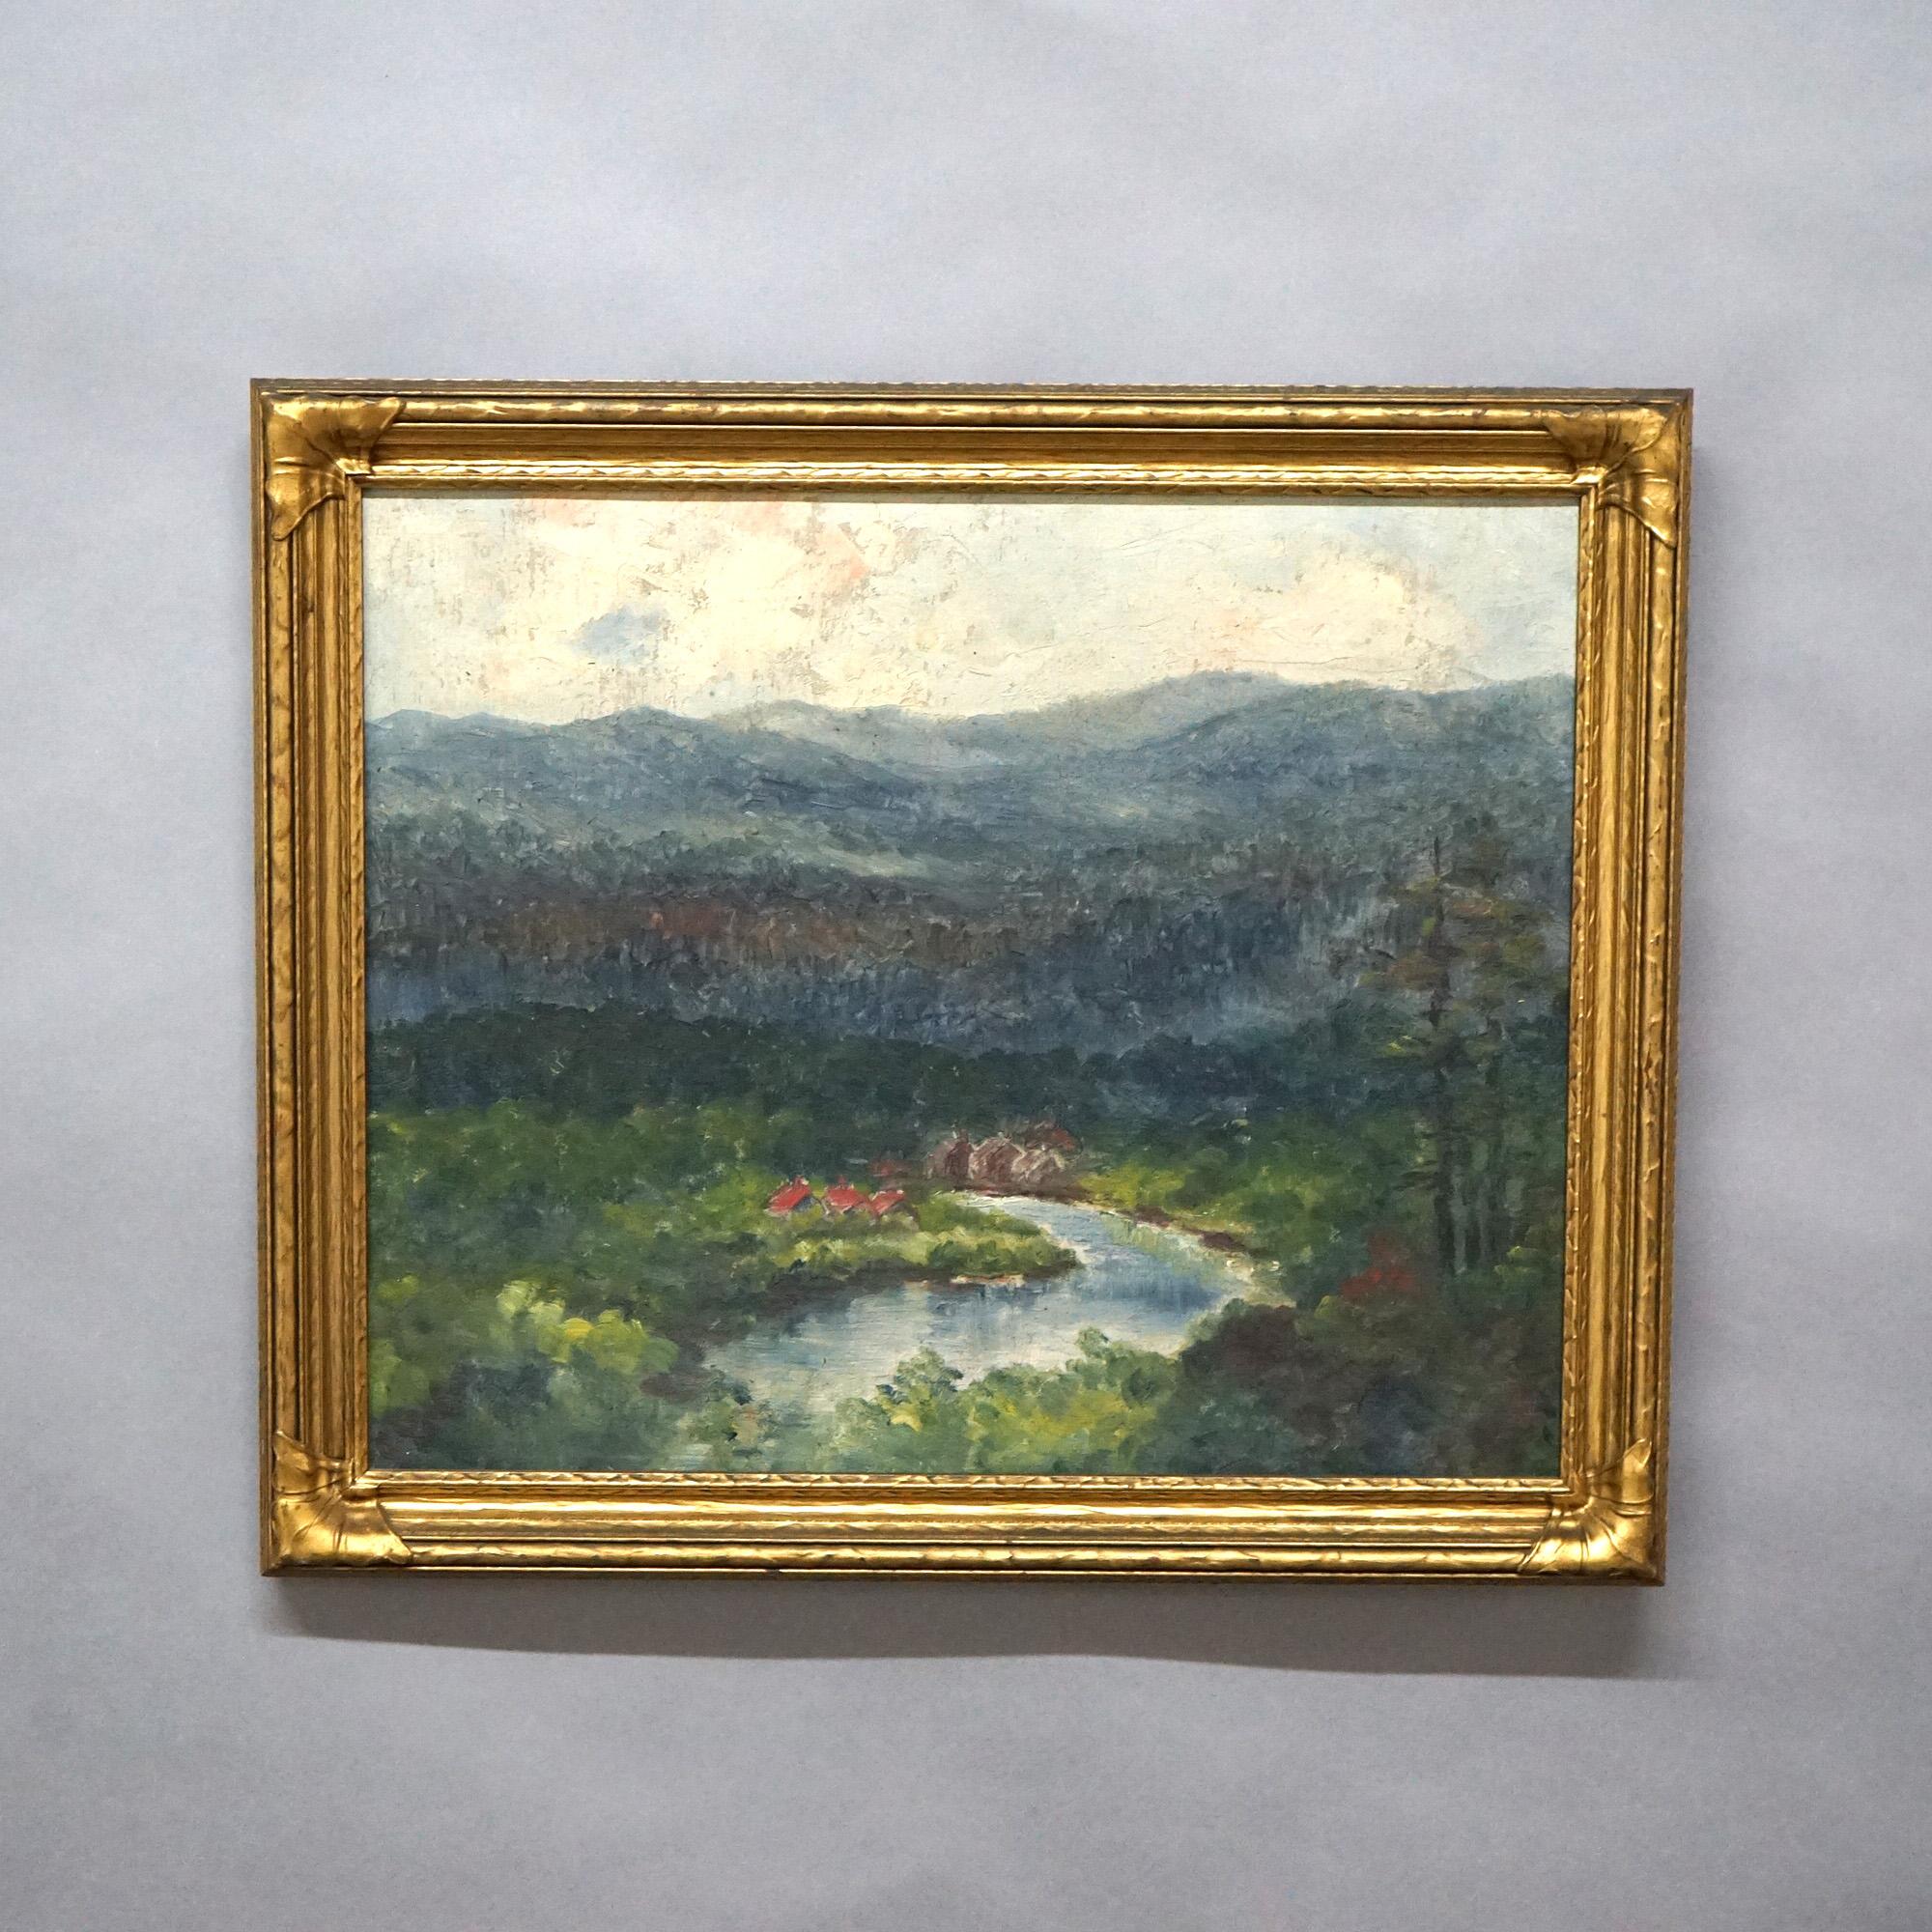 An antique New Hope School impressionist painting offers oil on boar landscape of a river valley, seated in giltwood frame, c1920

Measures - 16.5